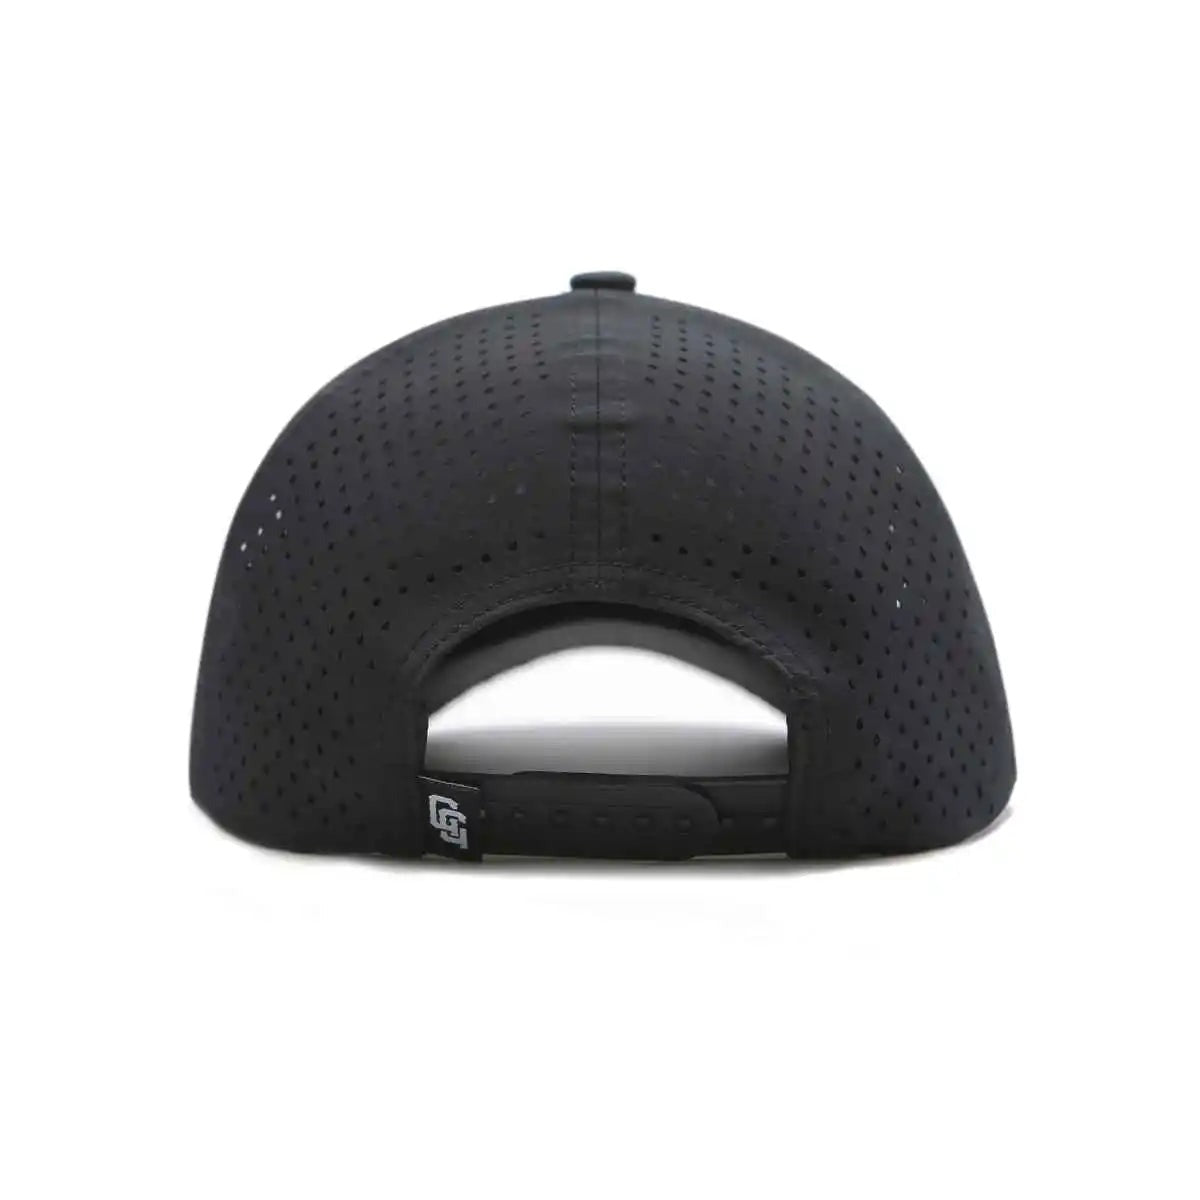 GOLF GODS Tour Pro I Hate Golf Hat in Black with Curved Brim